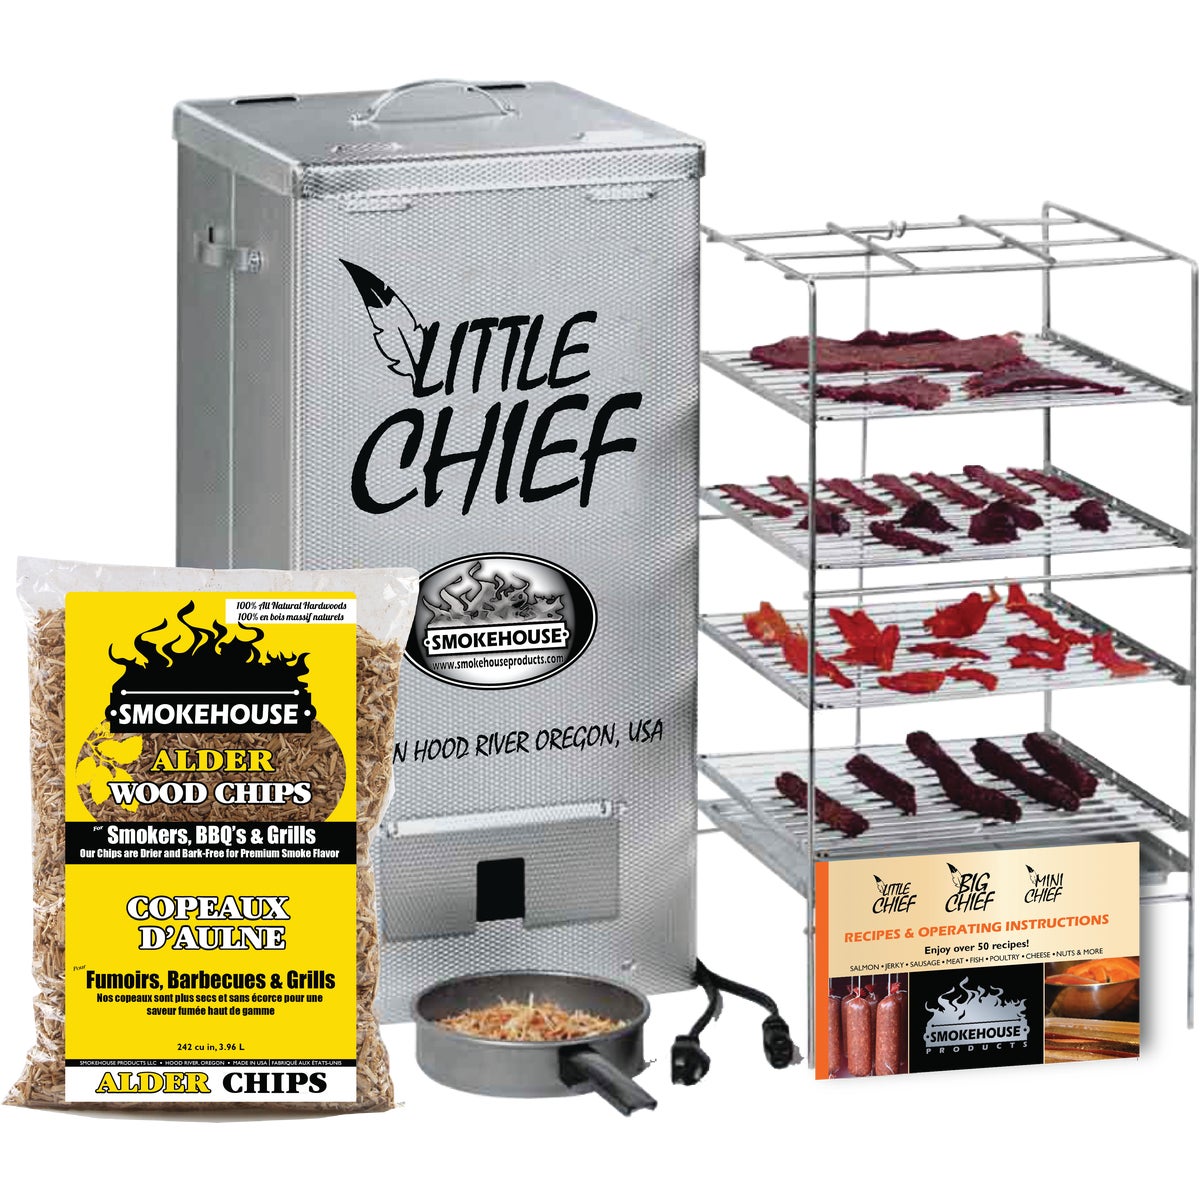 Item 823538, Electric smoker made for curing and smoking game and domestic meats.